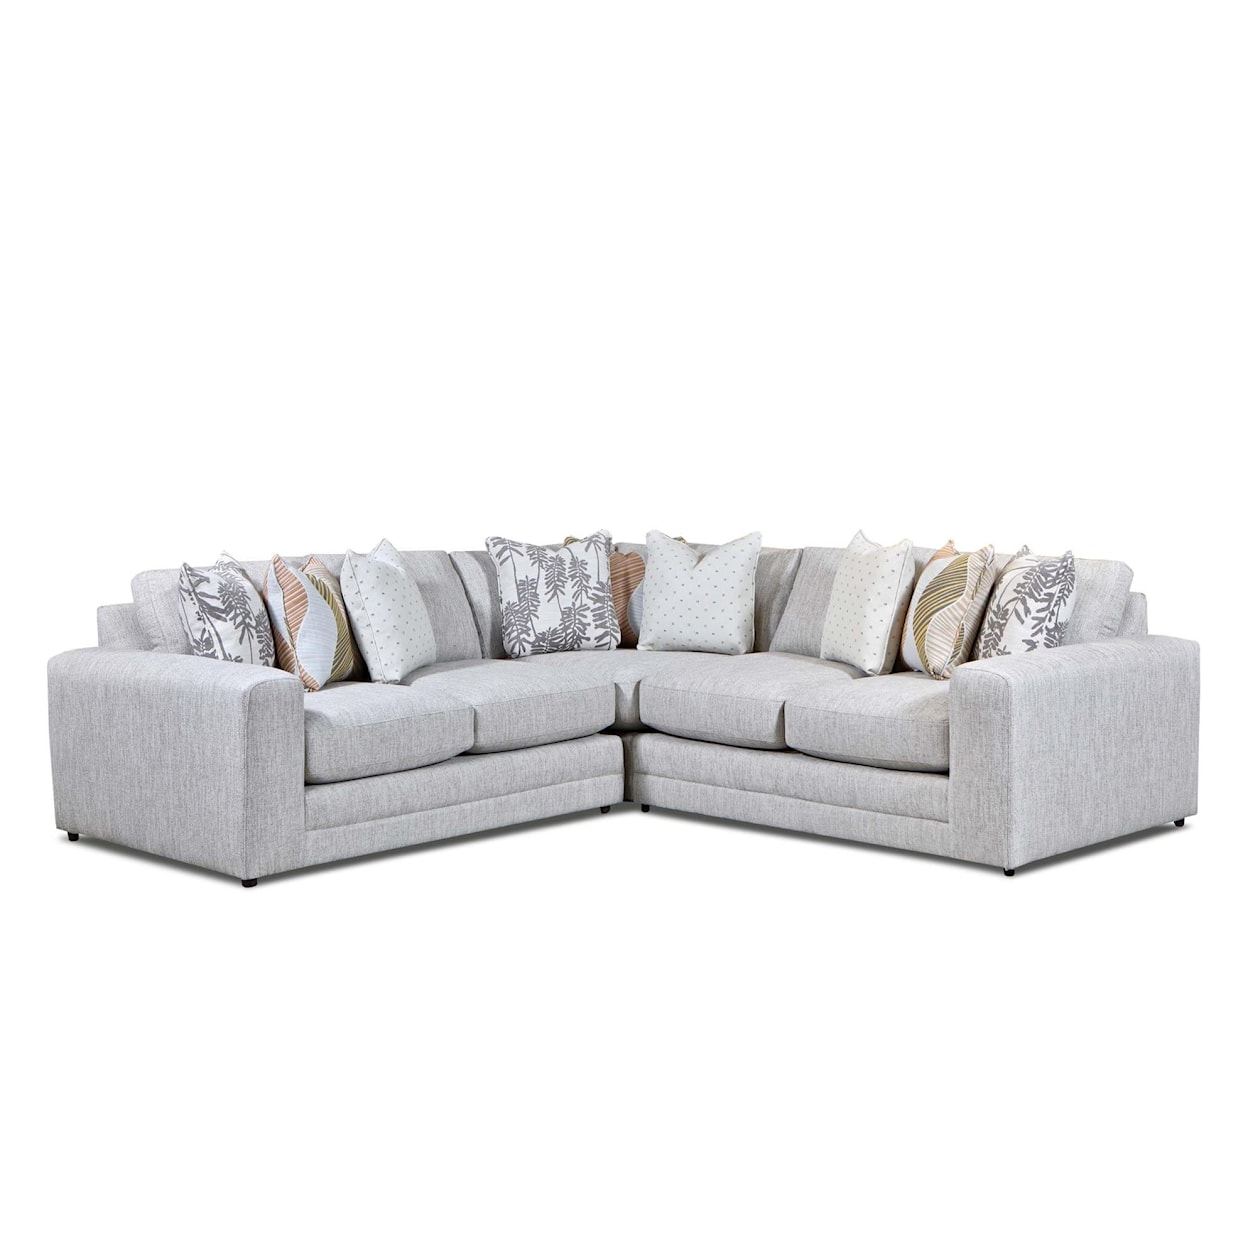 VFM Signature 7003 LOXLEY COCONUT Sectional